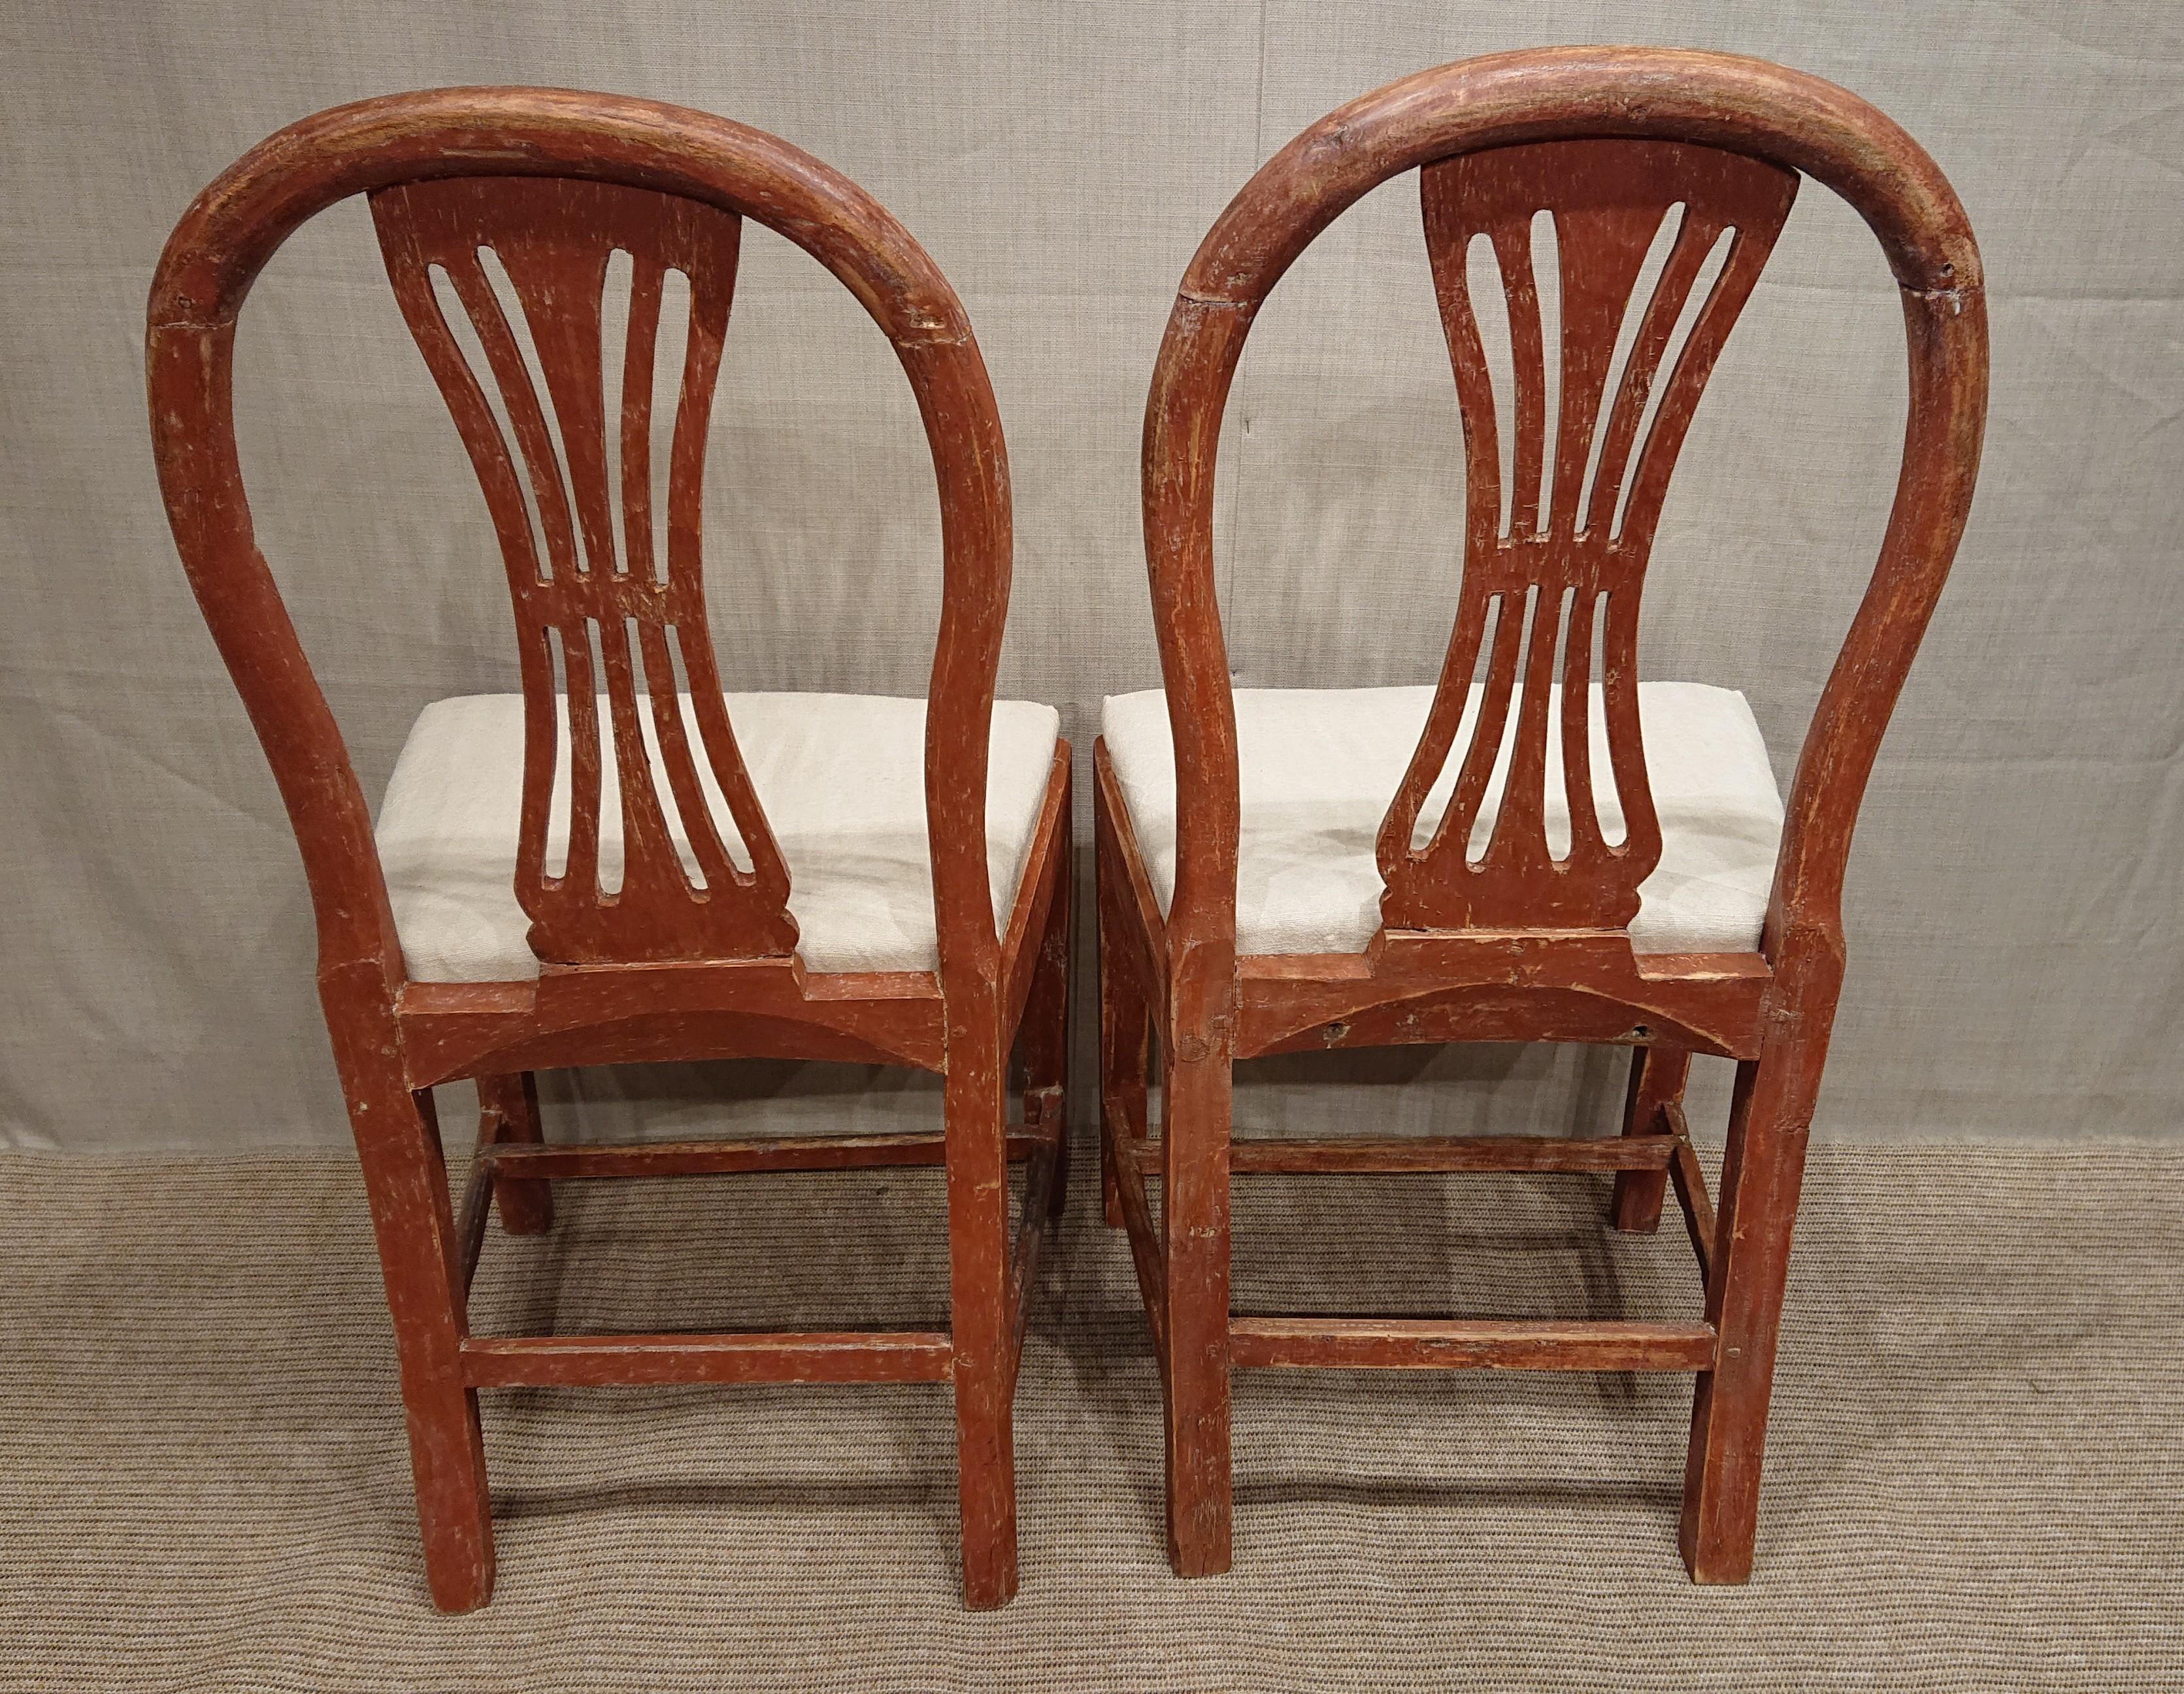 19th Century Swedish Gustavian Chairs with Original Paint Swedish Antiques For Sale 1